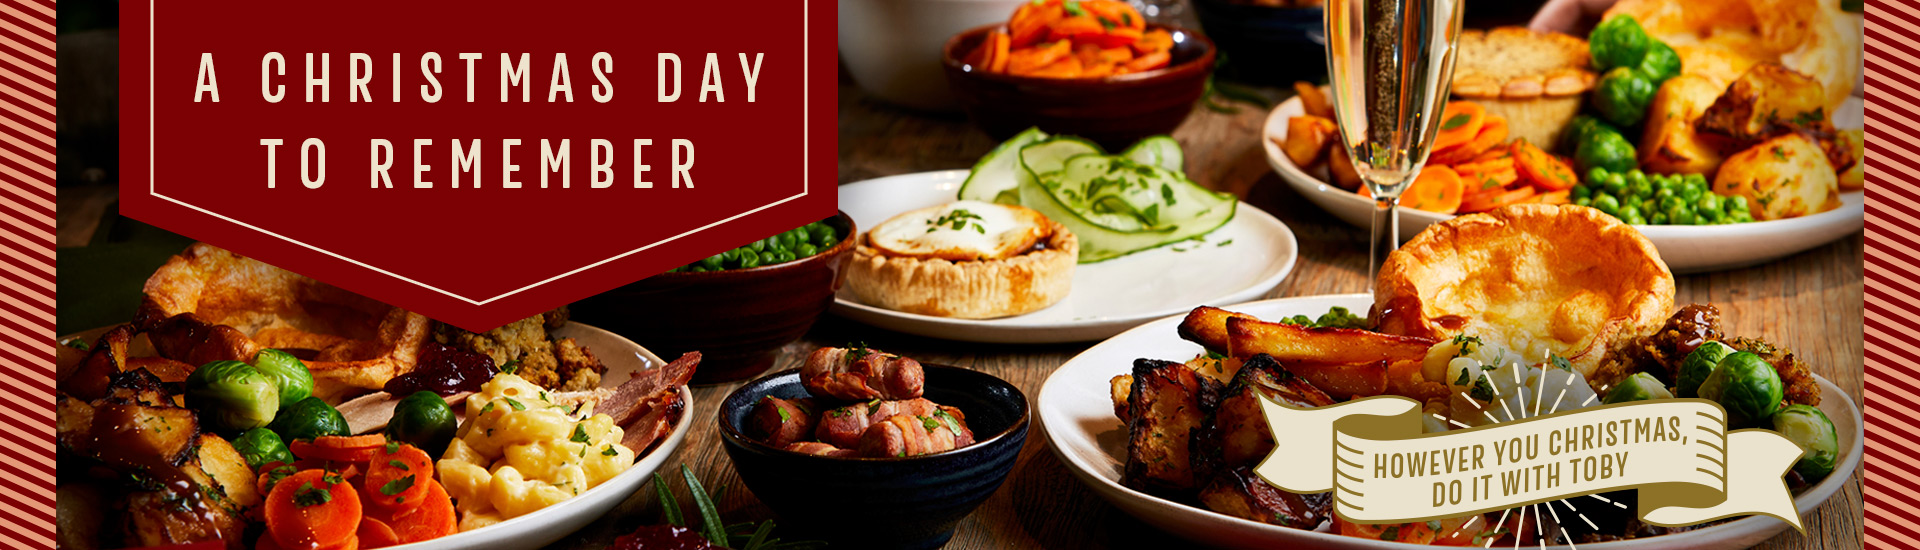 Christmas Day menu at Toby Carvery Aintree